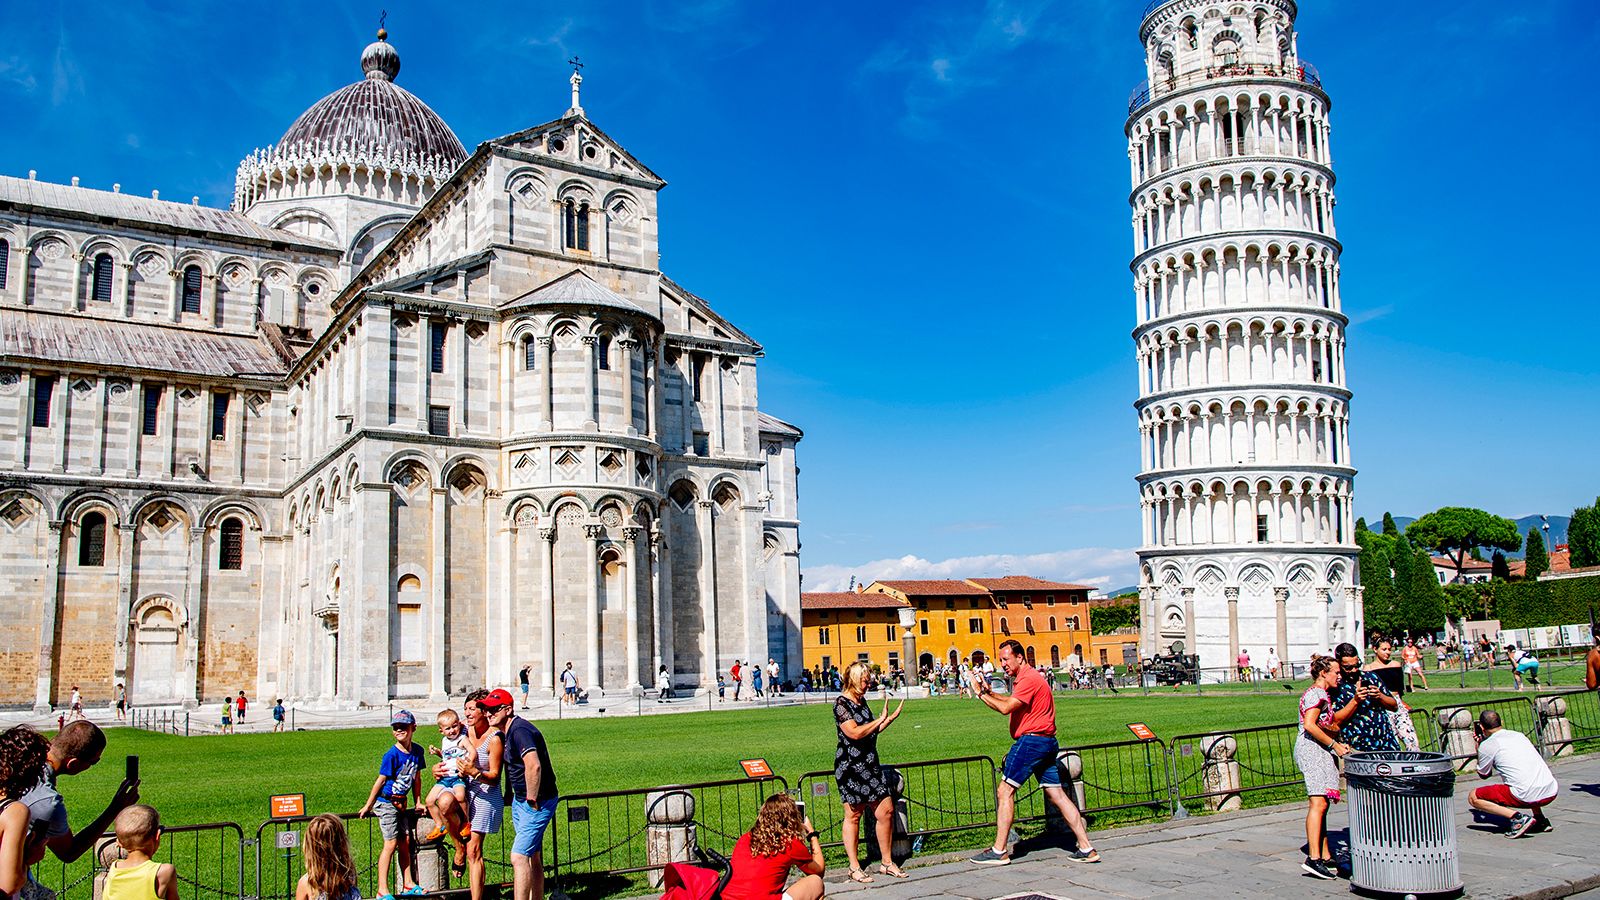 PISA, ITALY - 2020/08/25: Tourists seen at the tower of Pisa. (Photo by Robin Utrecht/SOPA Images/LightRocket via Getty Images)